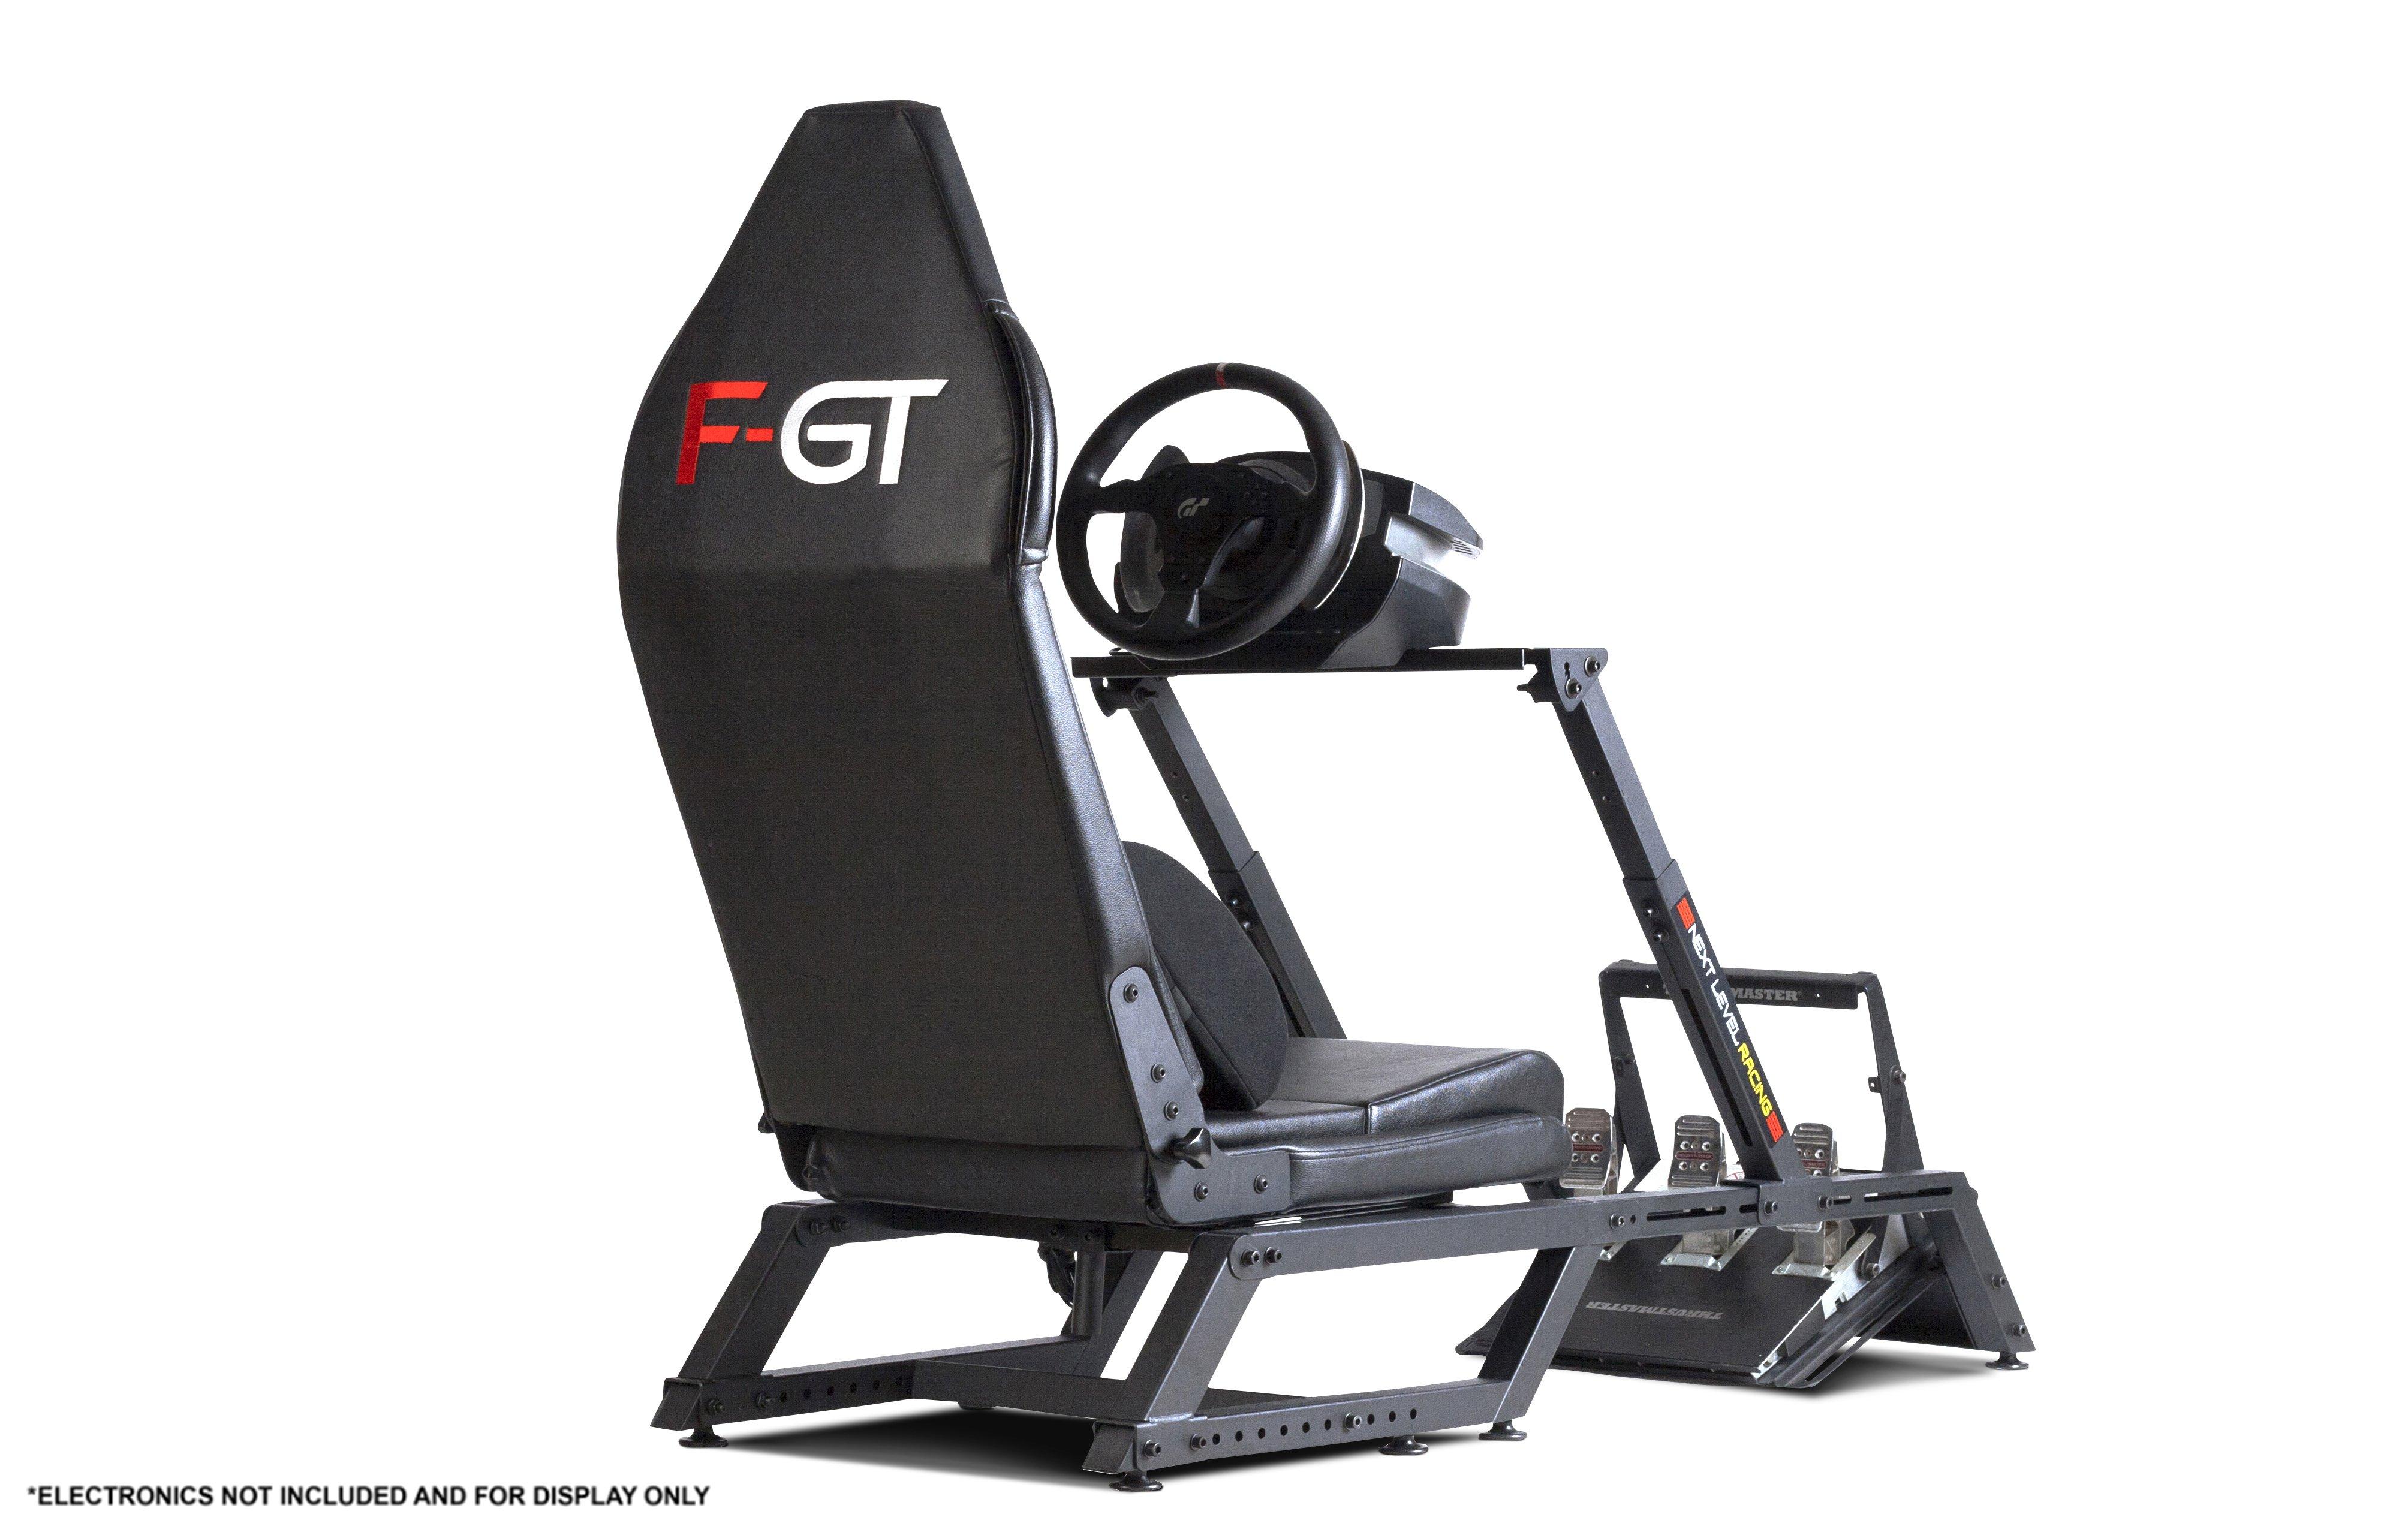 Next Level Racing F-GT Dual Position Simulator Stand